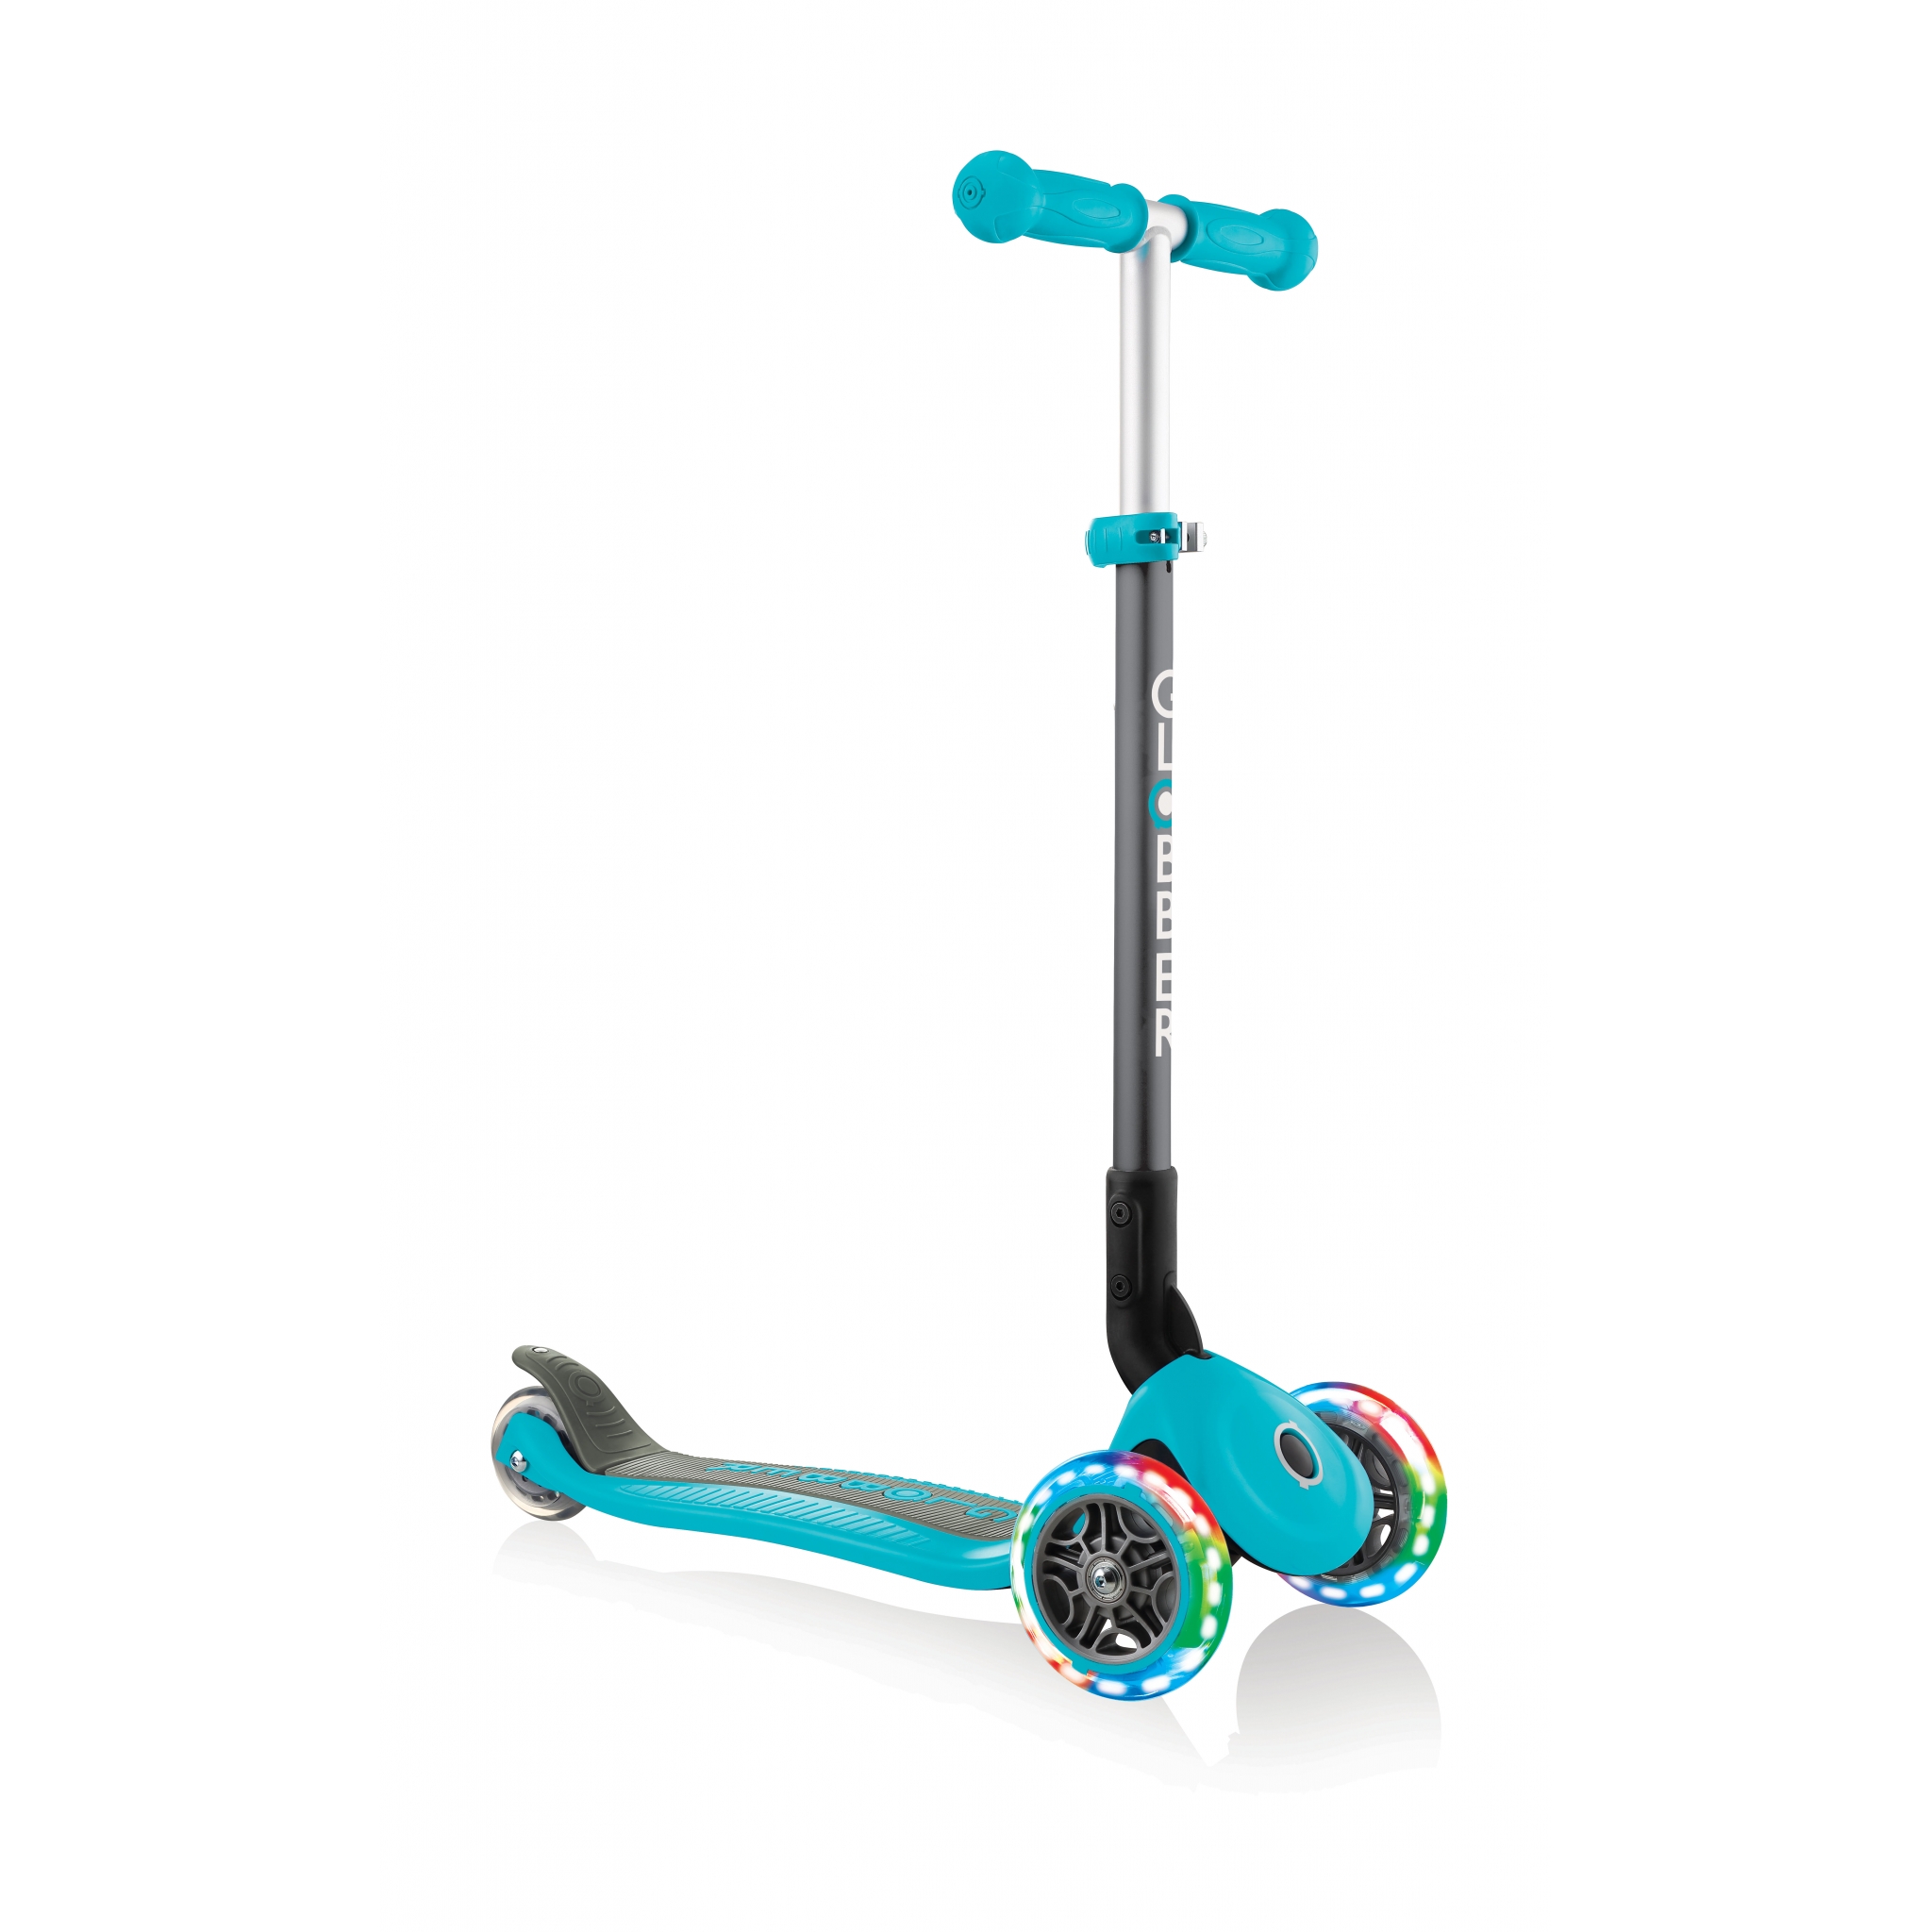 PRIMO-FOLDABLE-LIGHTS-3-wheel-foldable-scooter-light-up-scooter-for-kids-teal 4